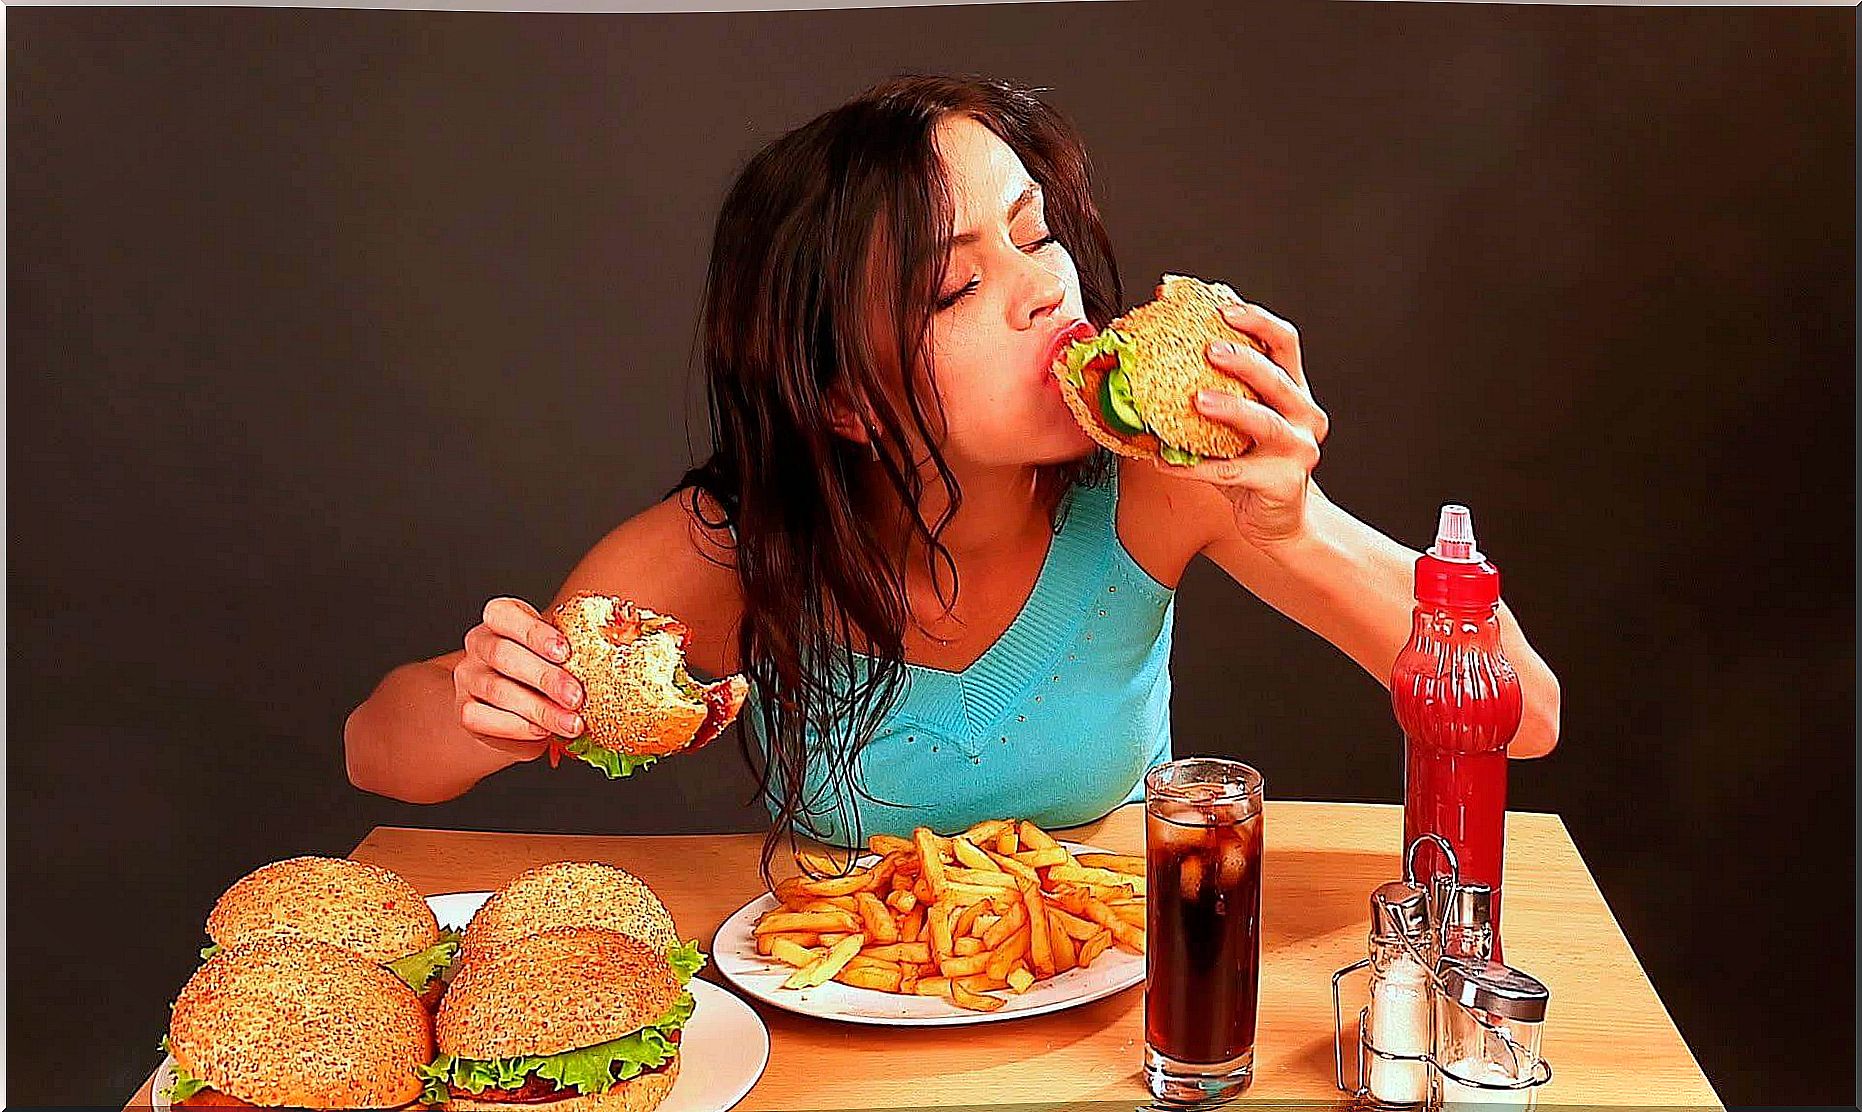 Emotional hunger drives people to eat junk food.